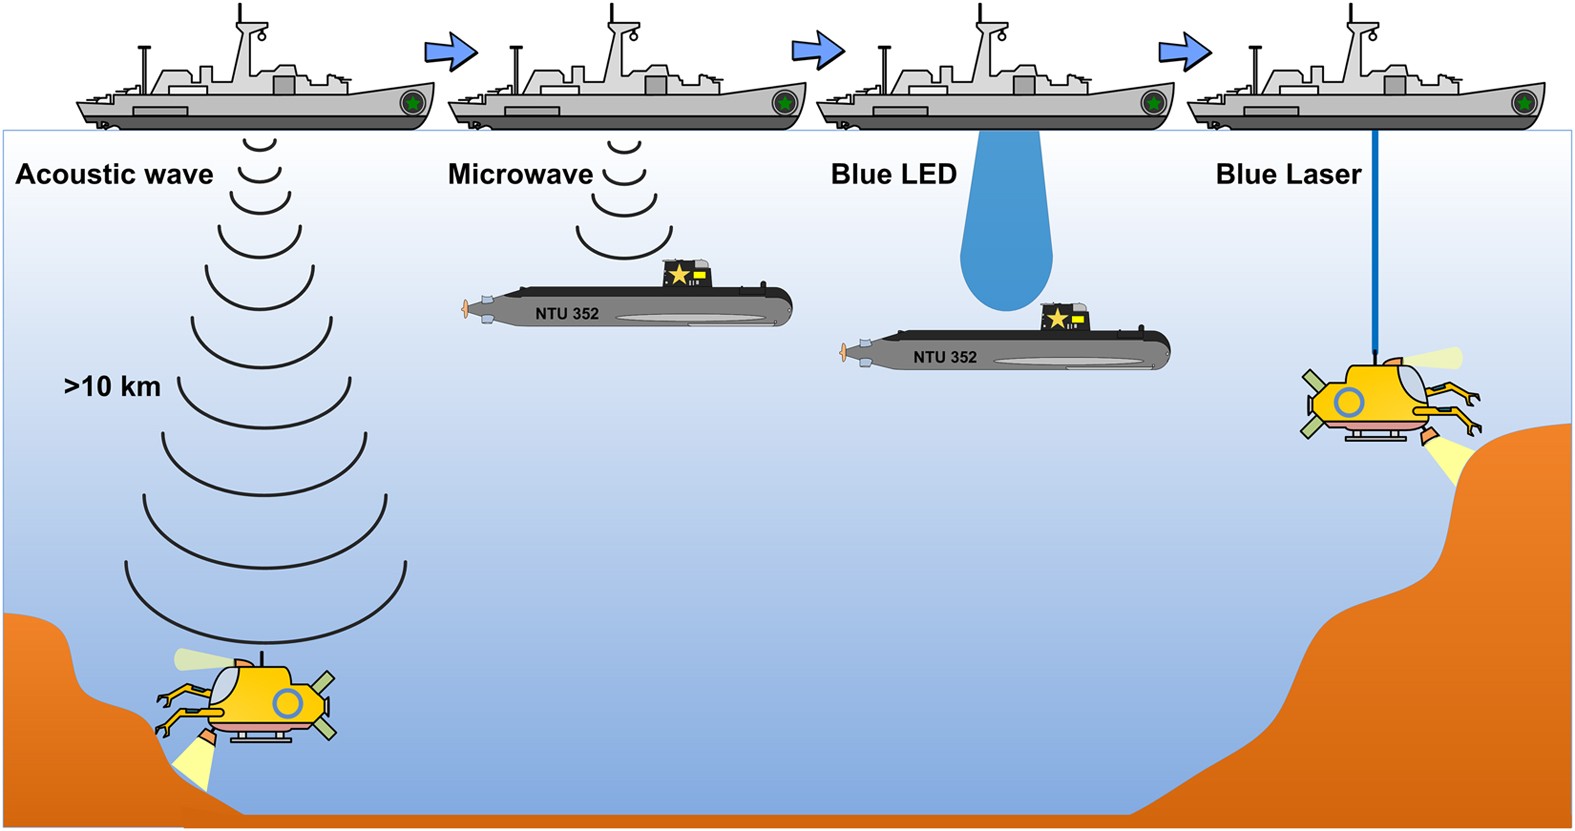 Blue Laser Diode Enables Underwater Communication at 12.4 Gbps | Scientific  Reports